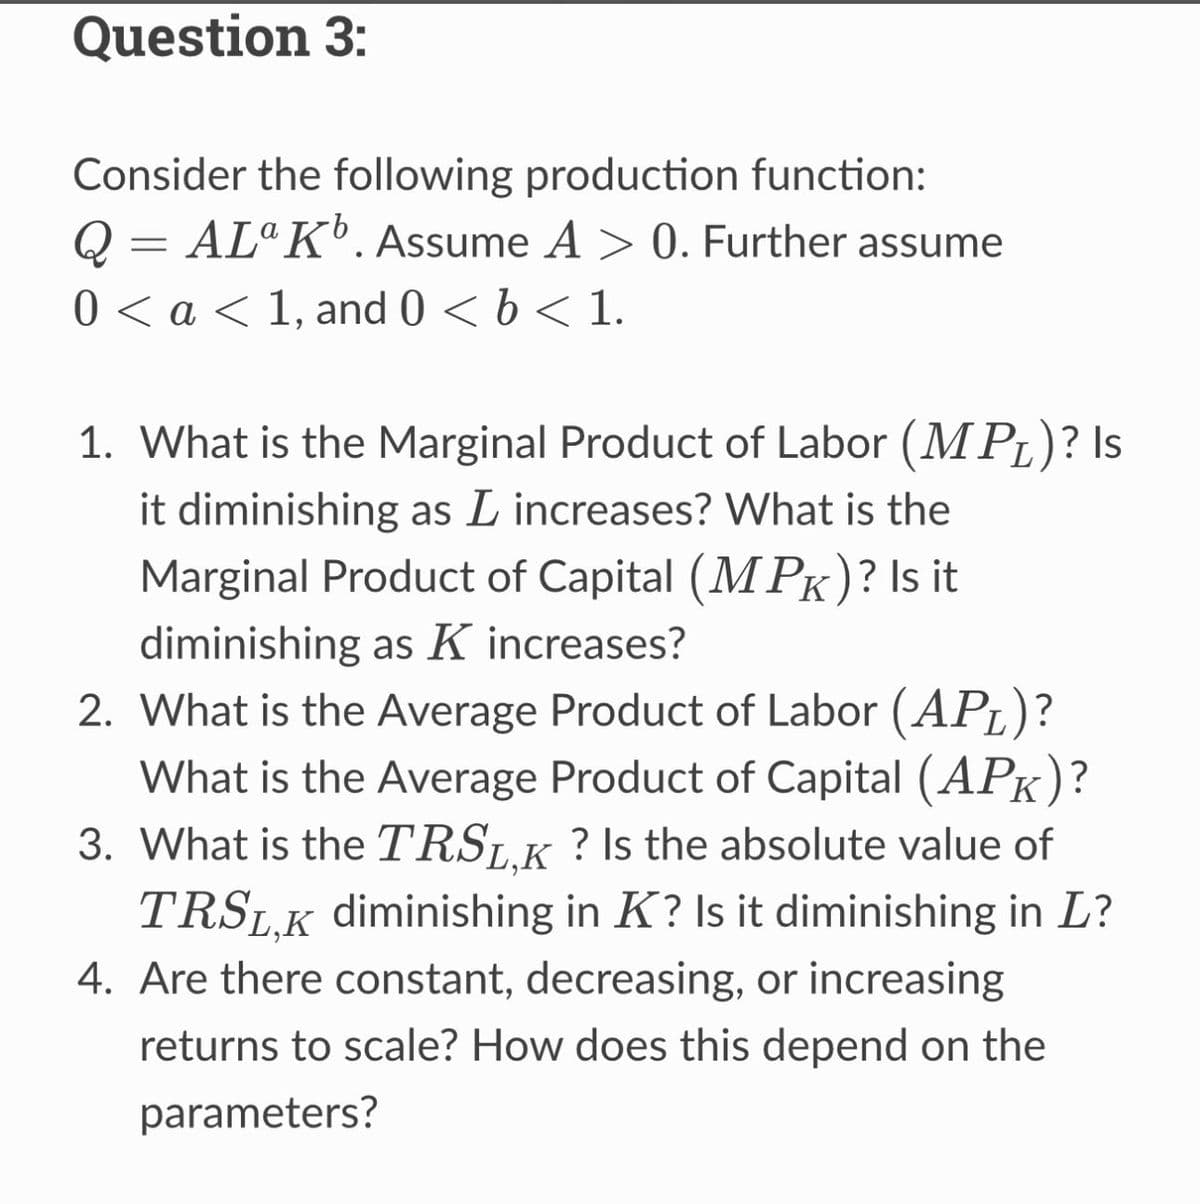 Question 3:
Consider the following production function:
Q = ALa K¹. Assume A > 0. Further assume
0 < a < 1, and 0 < b < 1.
1. What is the Marginal Product of Labor (MPL)? Is
it diminishing as L increases? What is the
Marginal Product of Capital (MPK)? Is it
diminishing as K increases?
2.
What is the Average Product of Labor (APL)?
What is the Average Product of Capital (APK)?
3. What is the TRSL,K? Is the absolute value of
TRSL,K diminishing in K? Is it diminishing in L?
4. Are there constant, decreasing, or increasing
returns to scale? How does this depend on the
parameters?